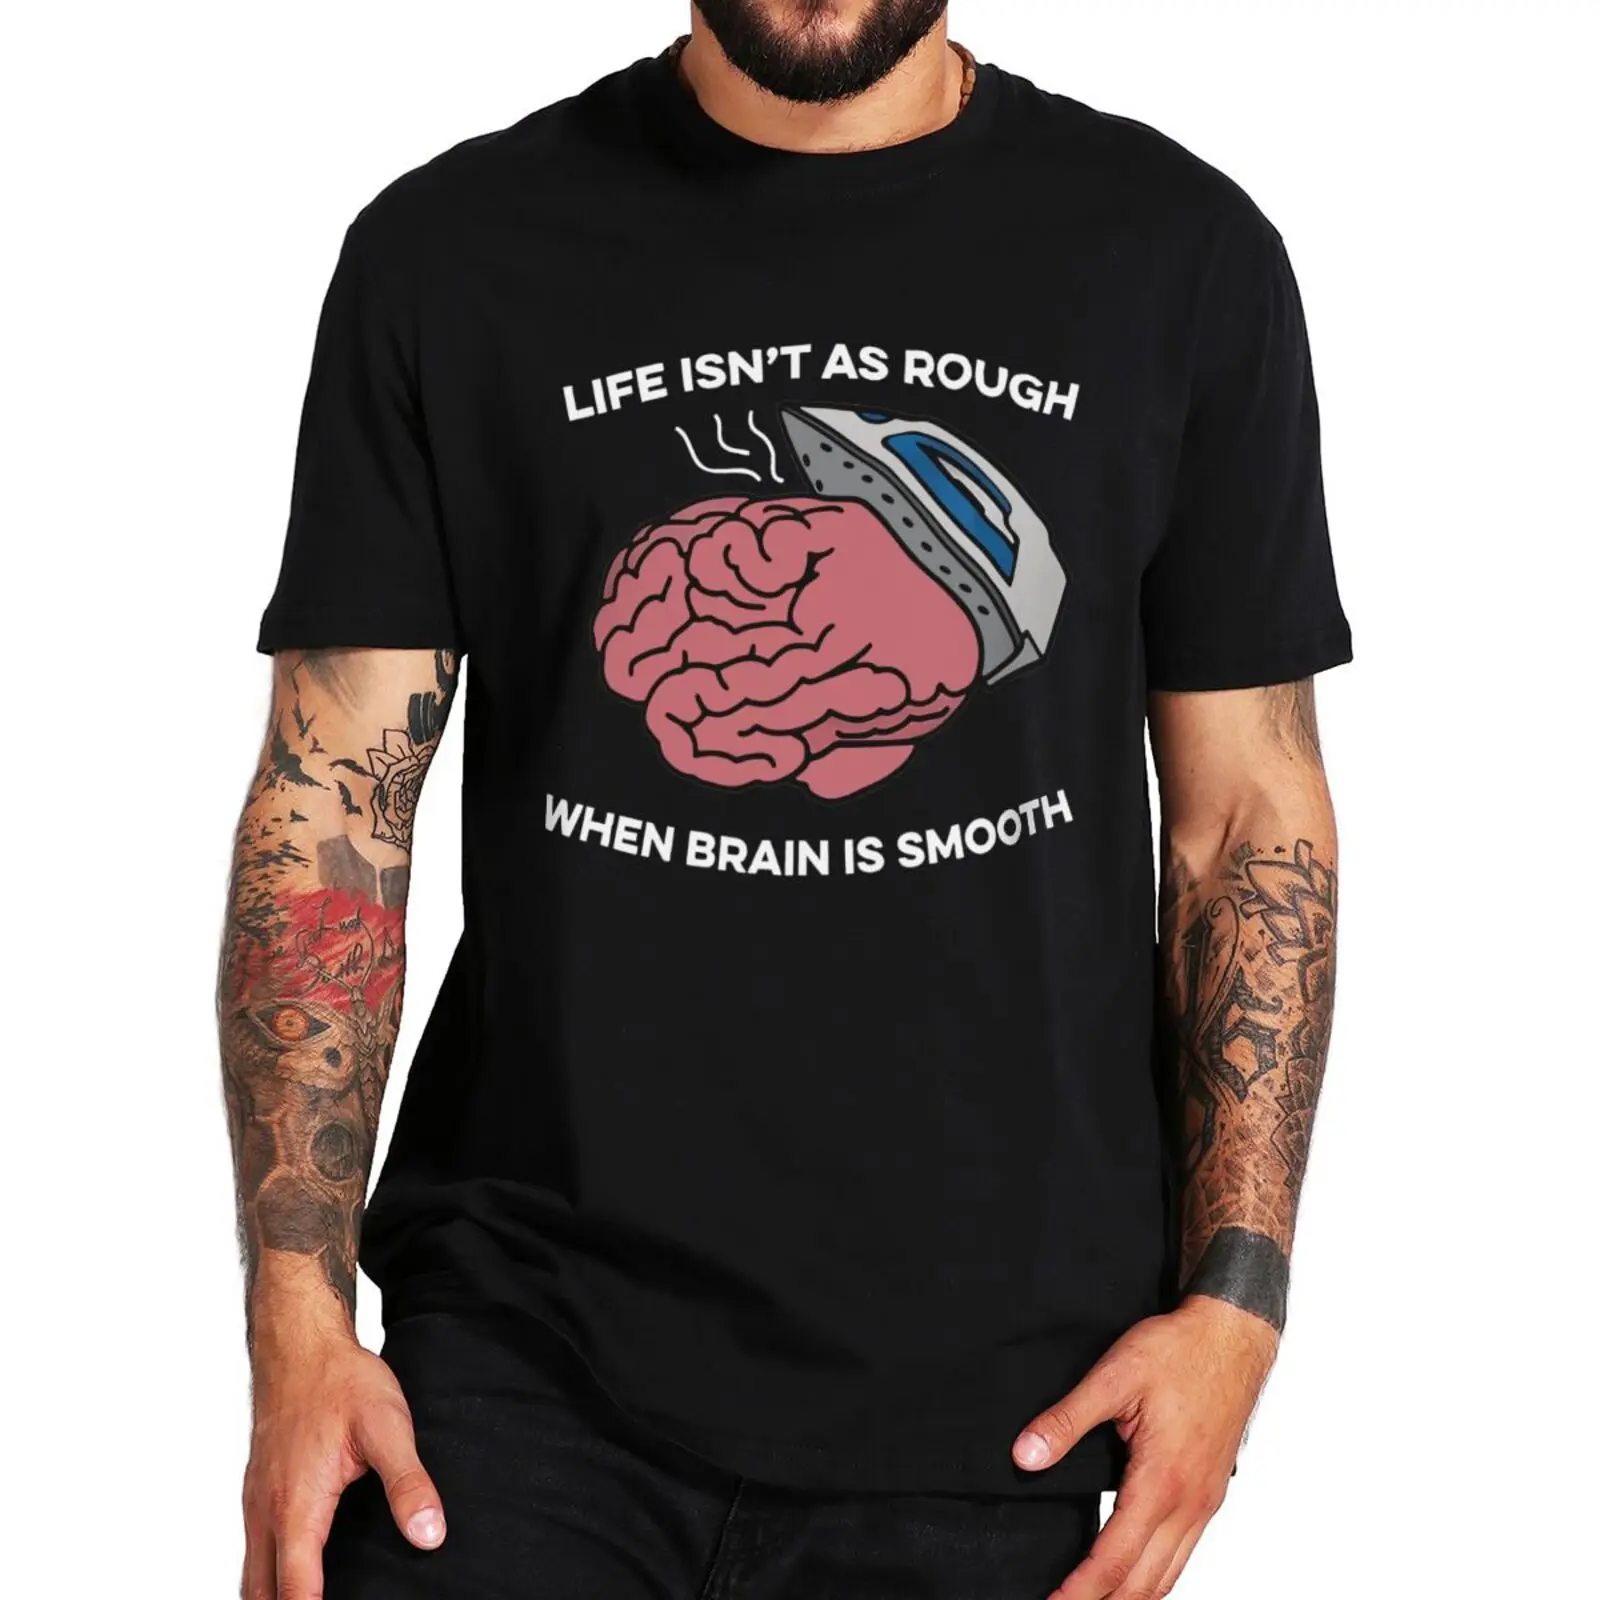 

Lift Is Not Rough T Shirt Funny Humor Brain Quotes Jokes Casual Tee Tops Short Sleeve 100% Cotton T-Shirt